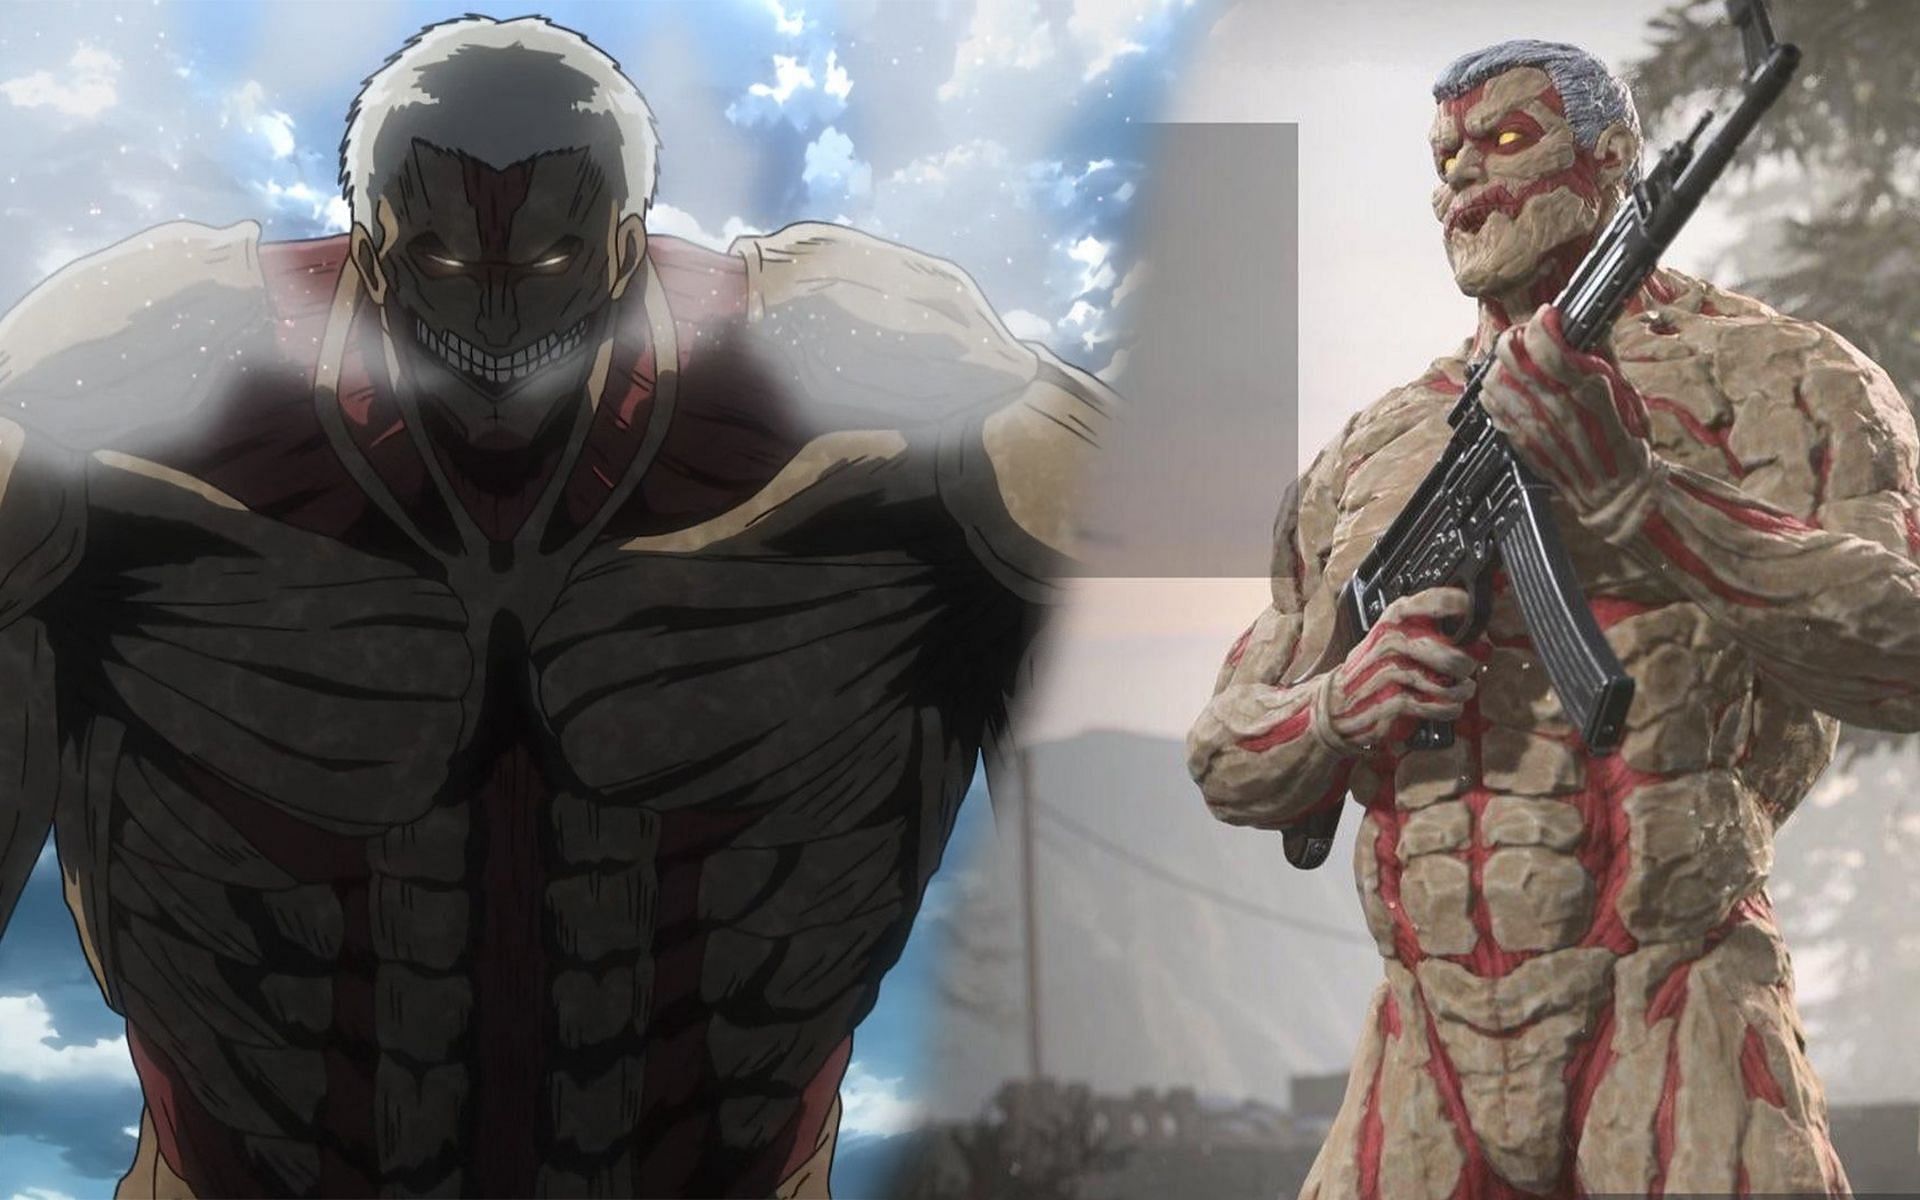 Community&#039;s reaction on the Armored Titan in Call of Duty Vanguard (Image via Crunchyroll/Activision)